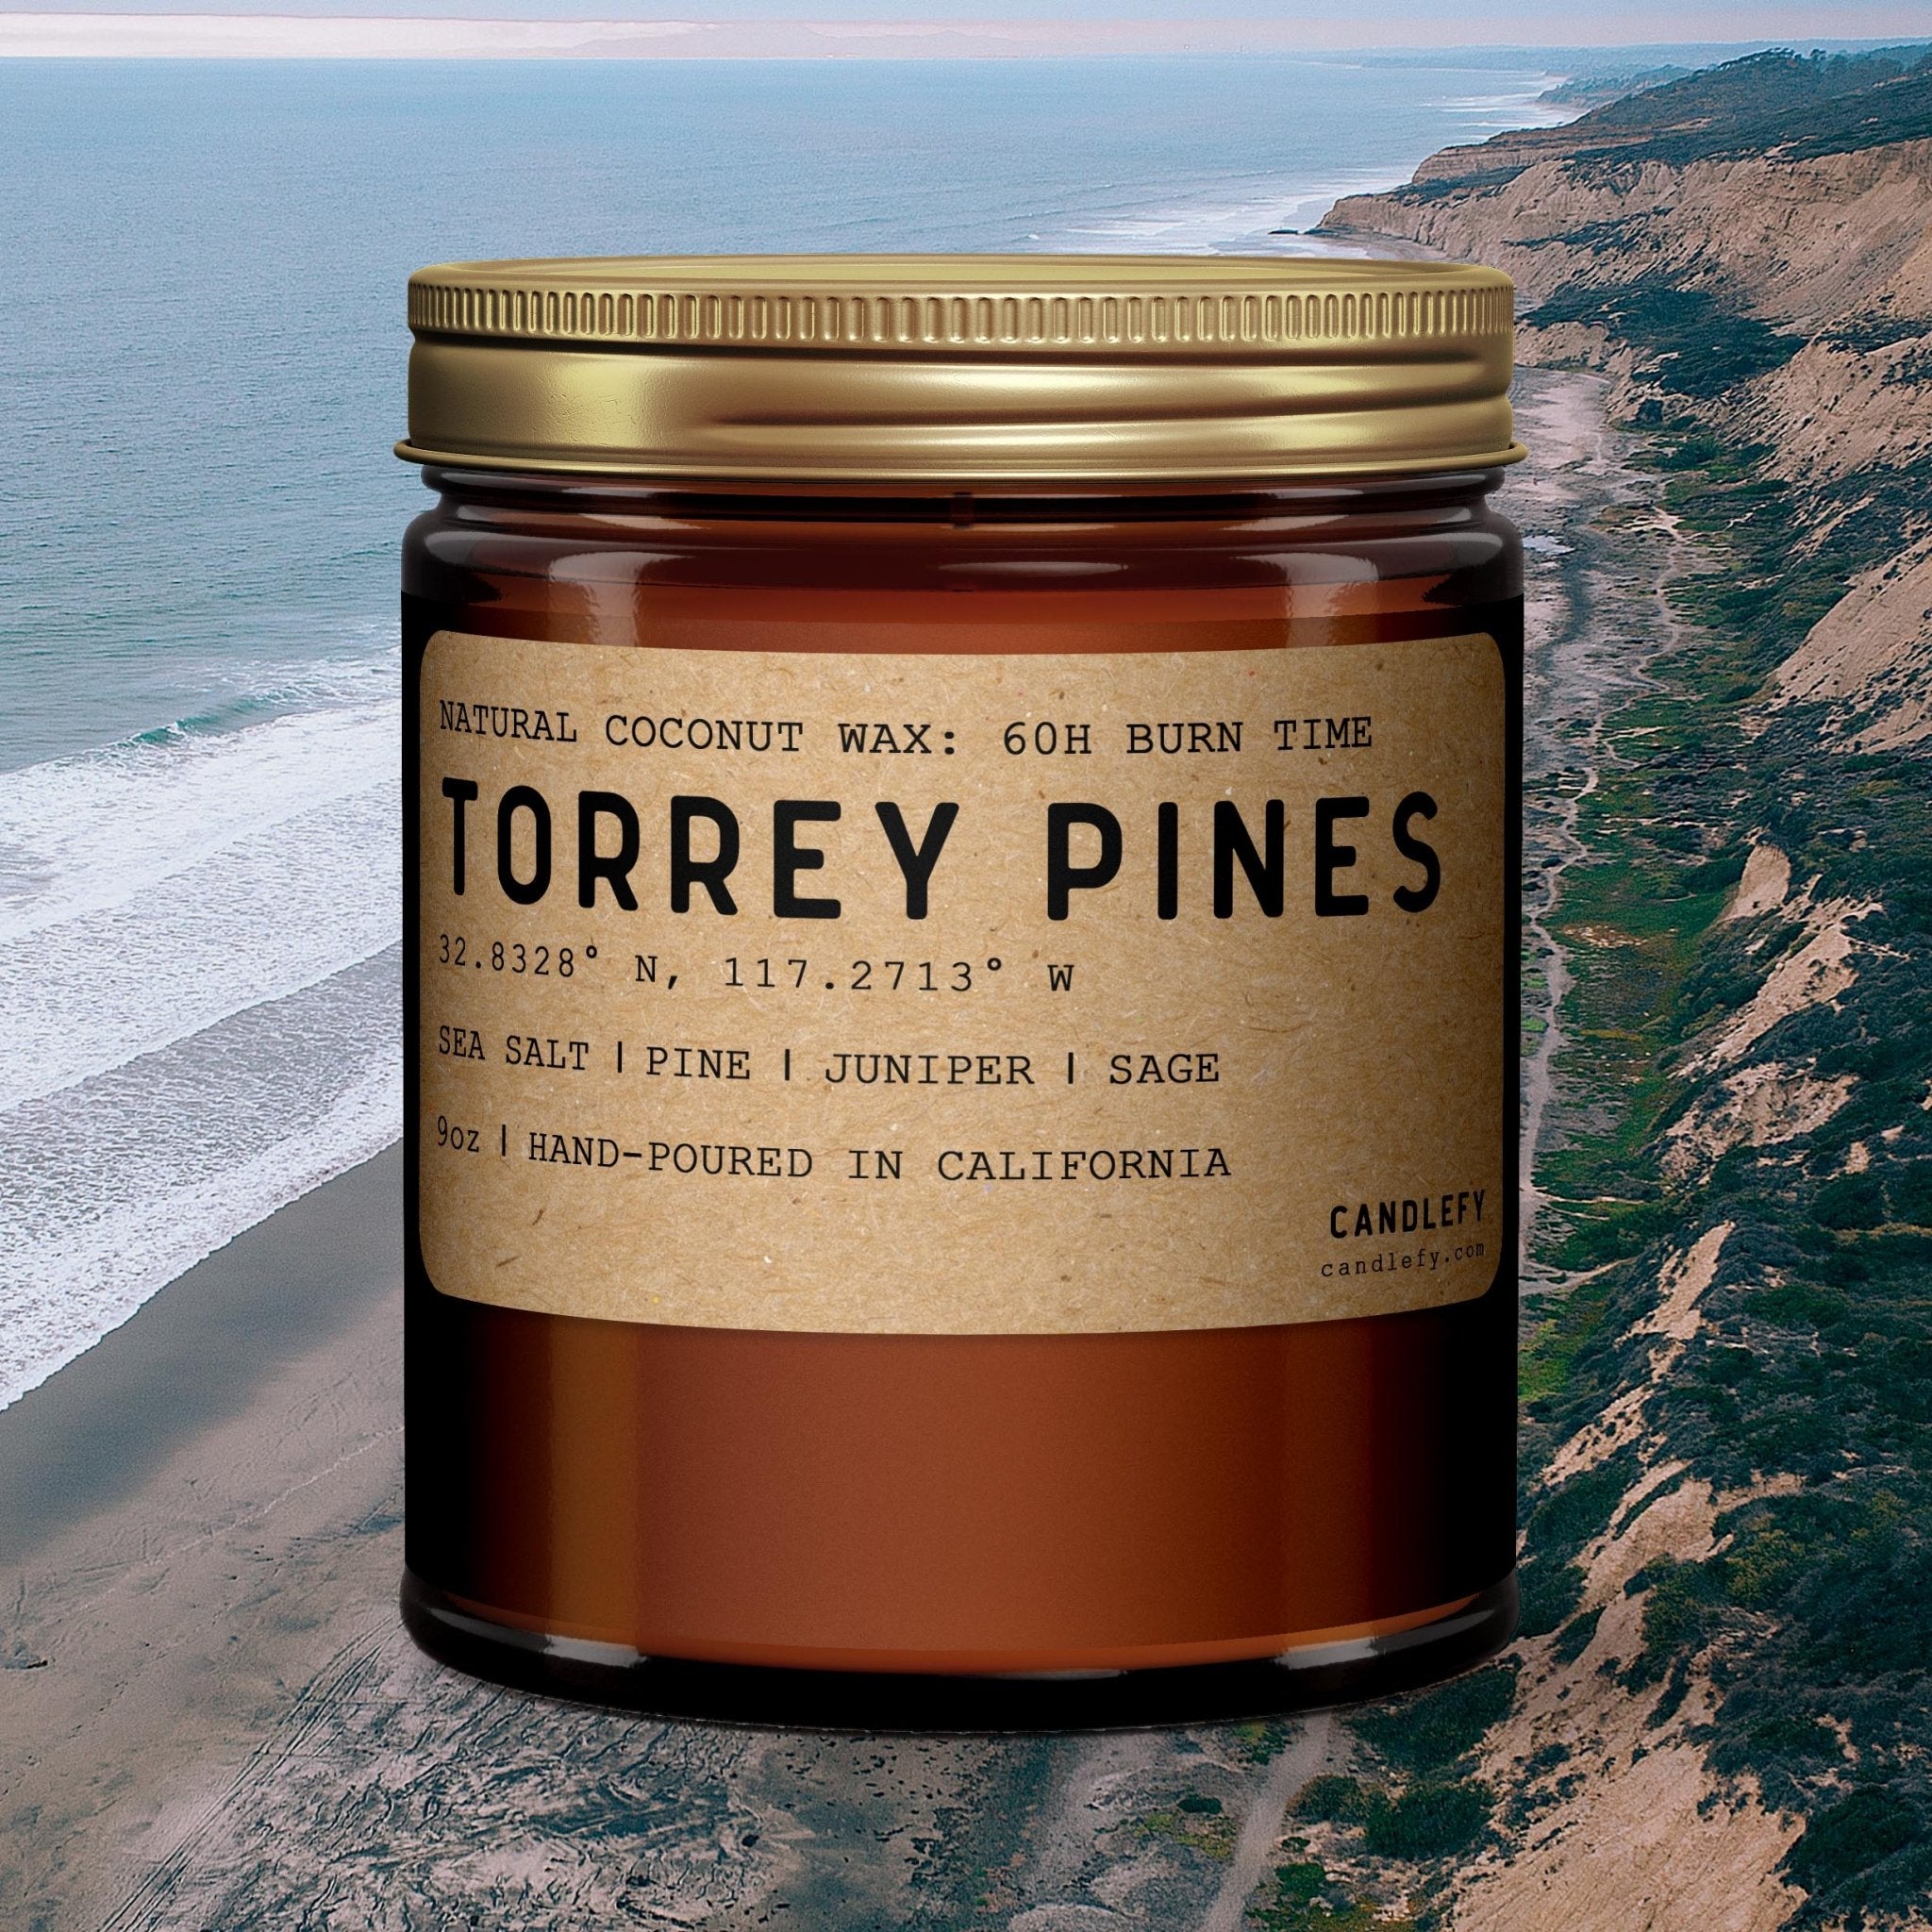 Torrey Pines: California Scented Candle - Candlefy